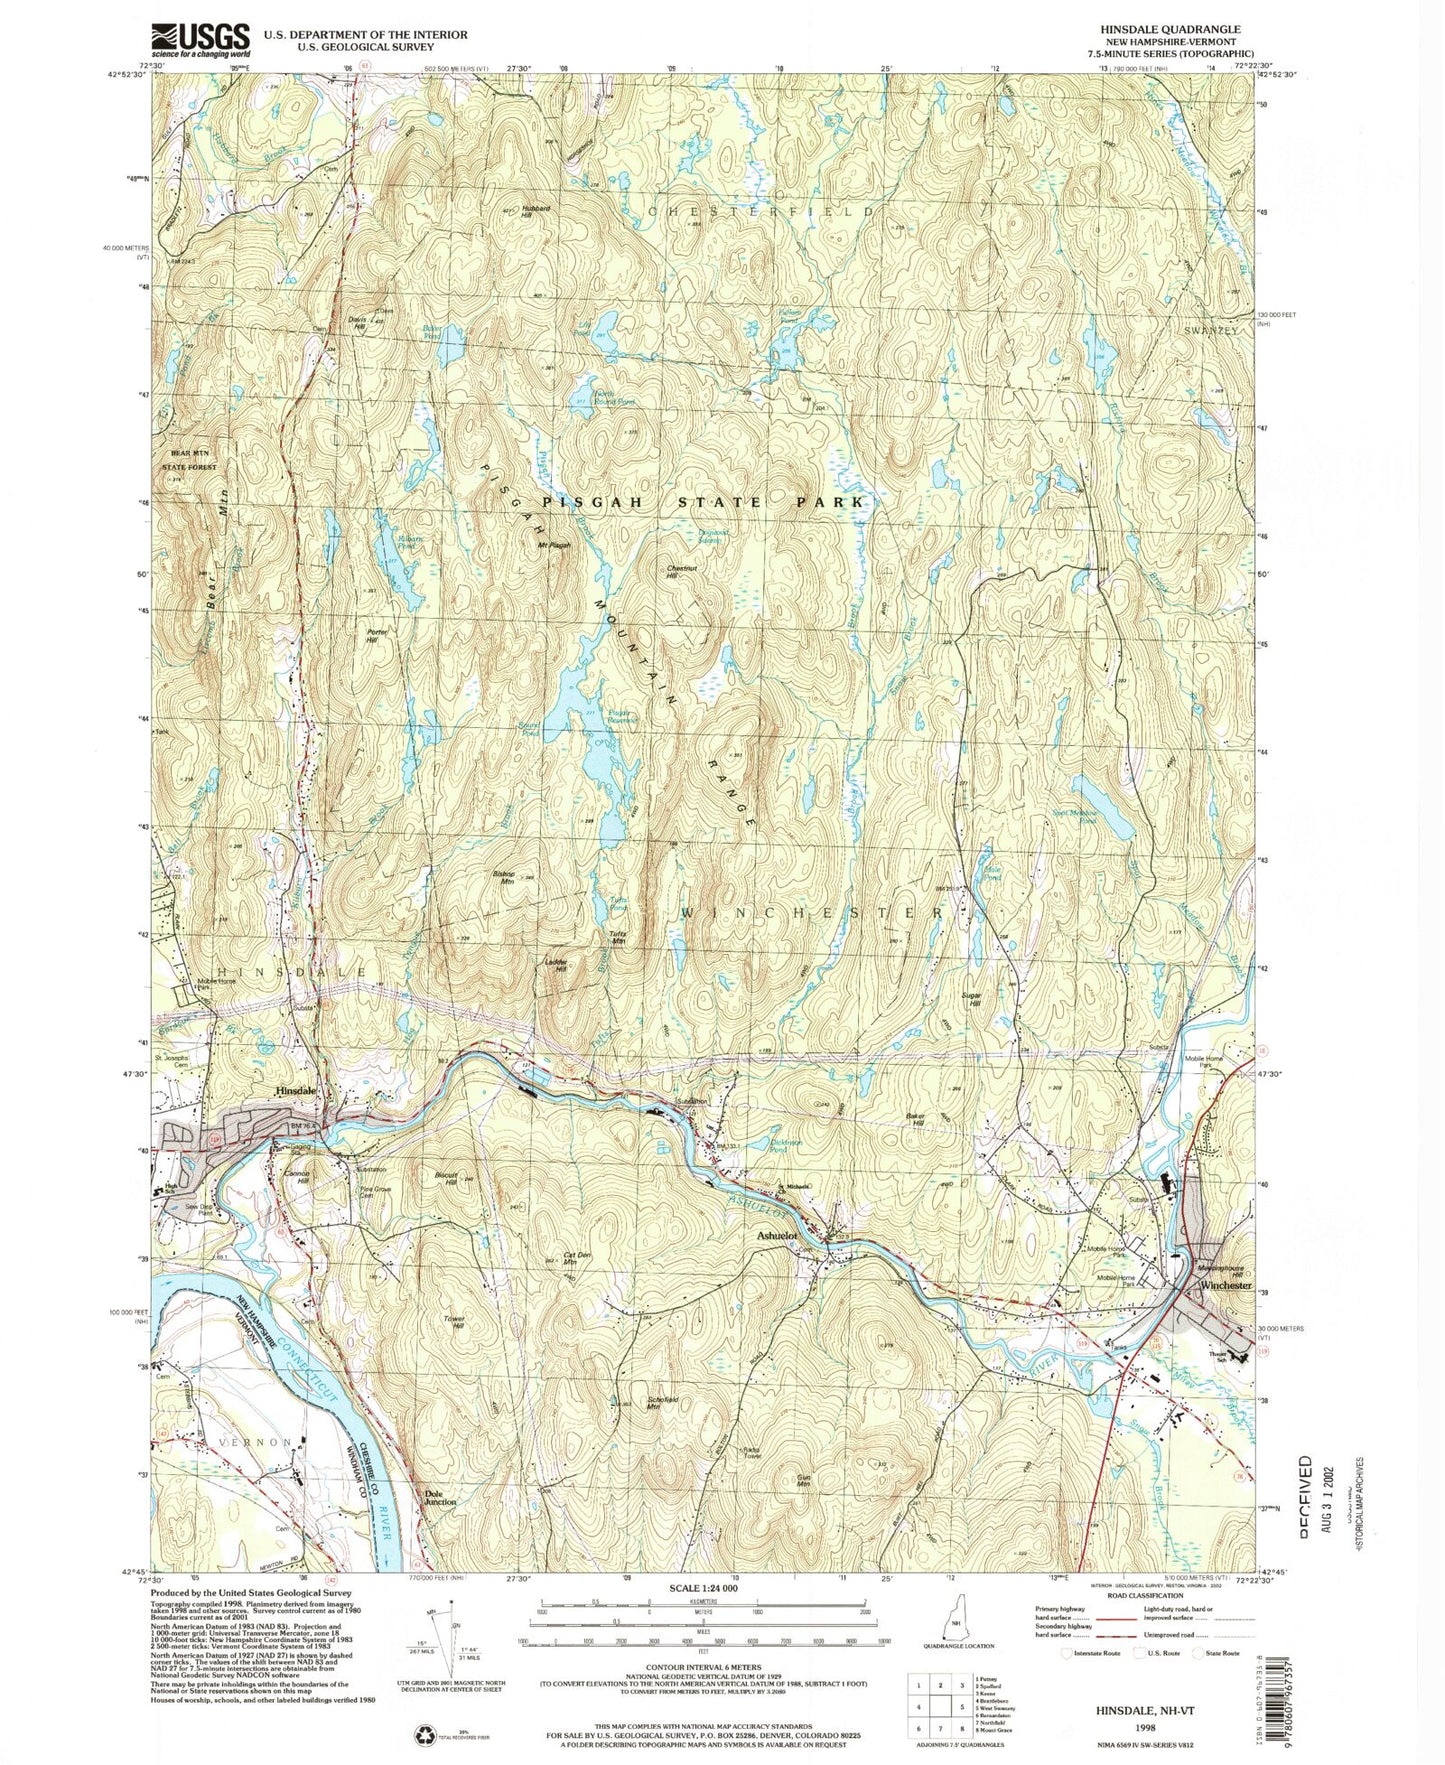 Classic USGS Hinsdale New Hampshire 7.5'x7.5' Topo Map Image